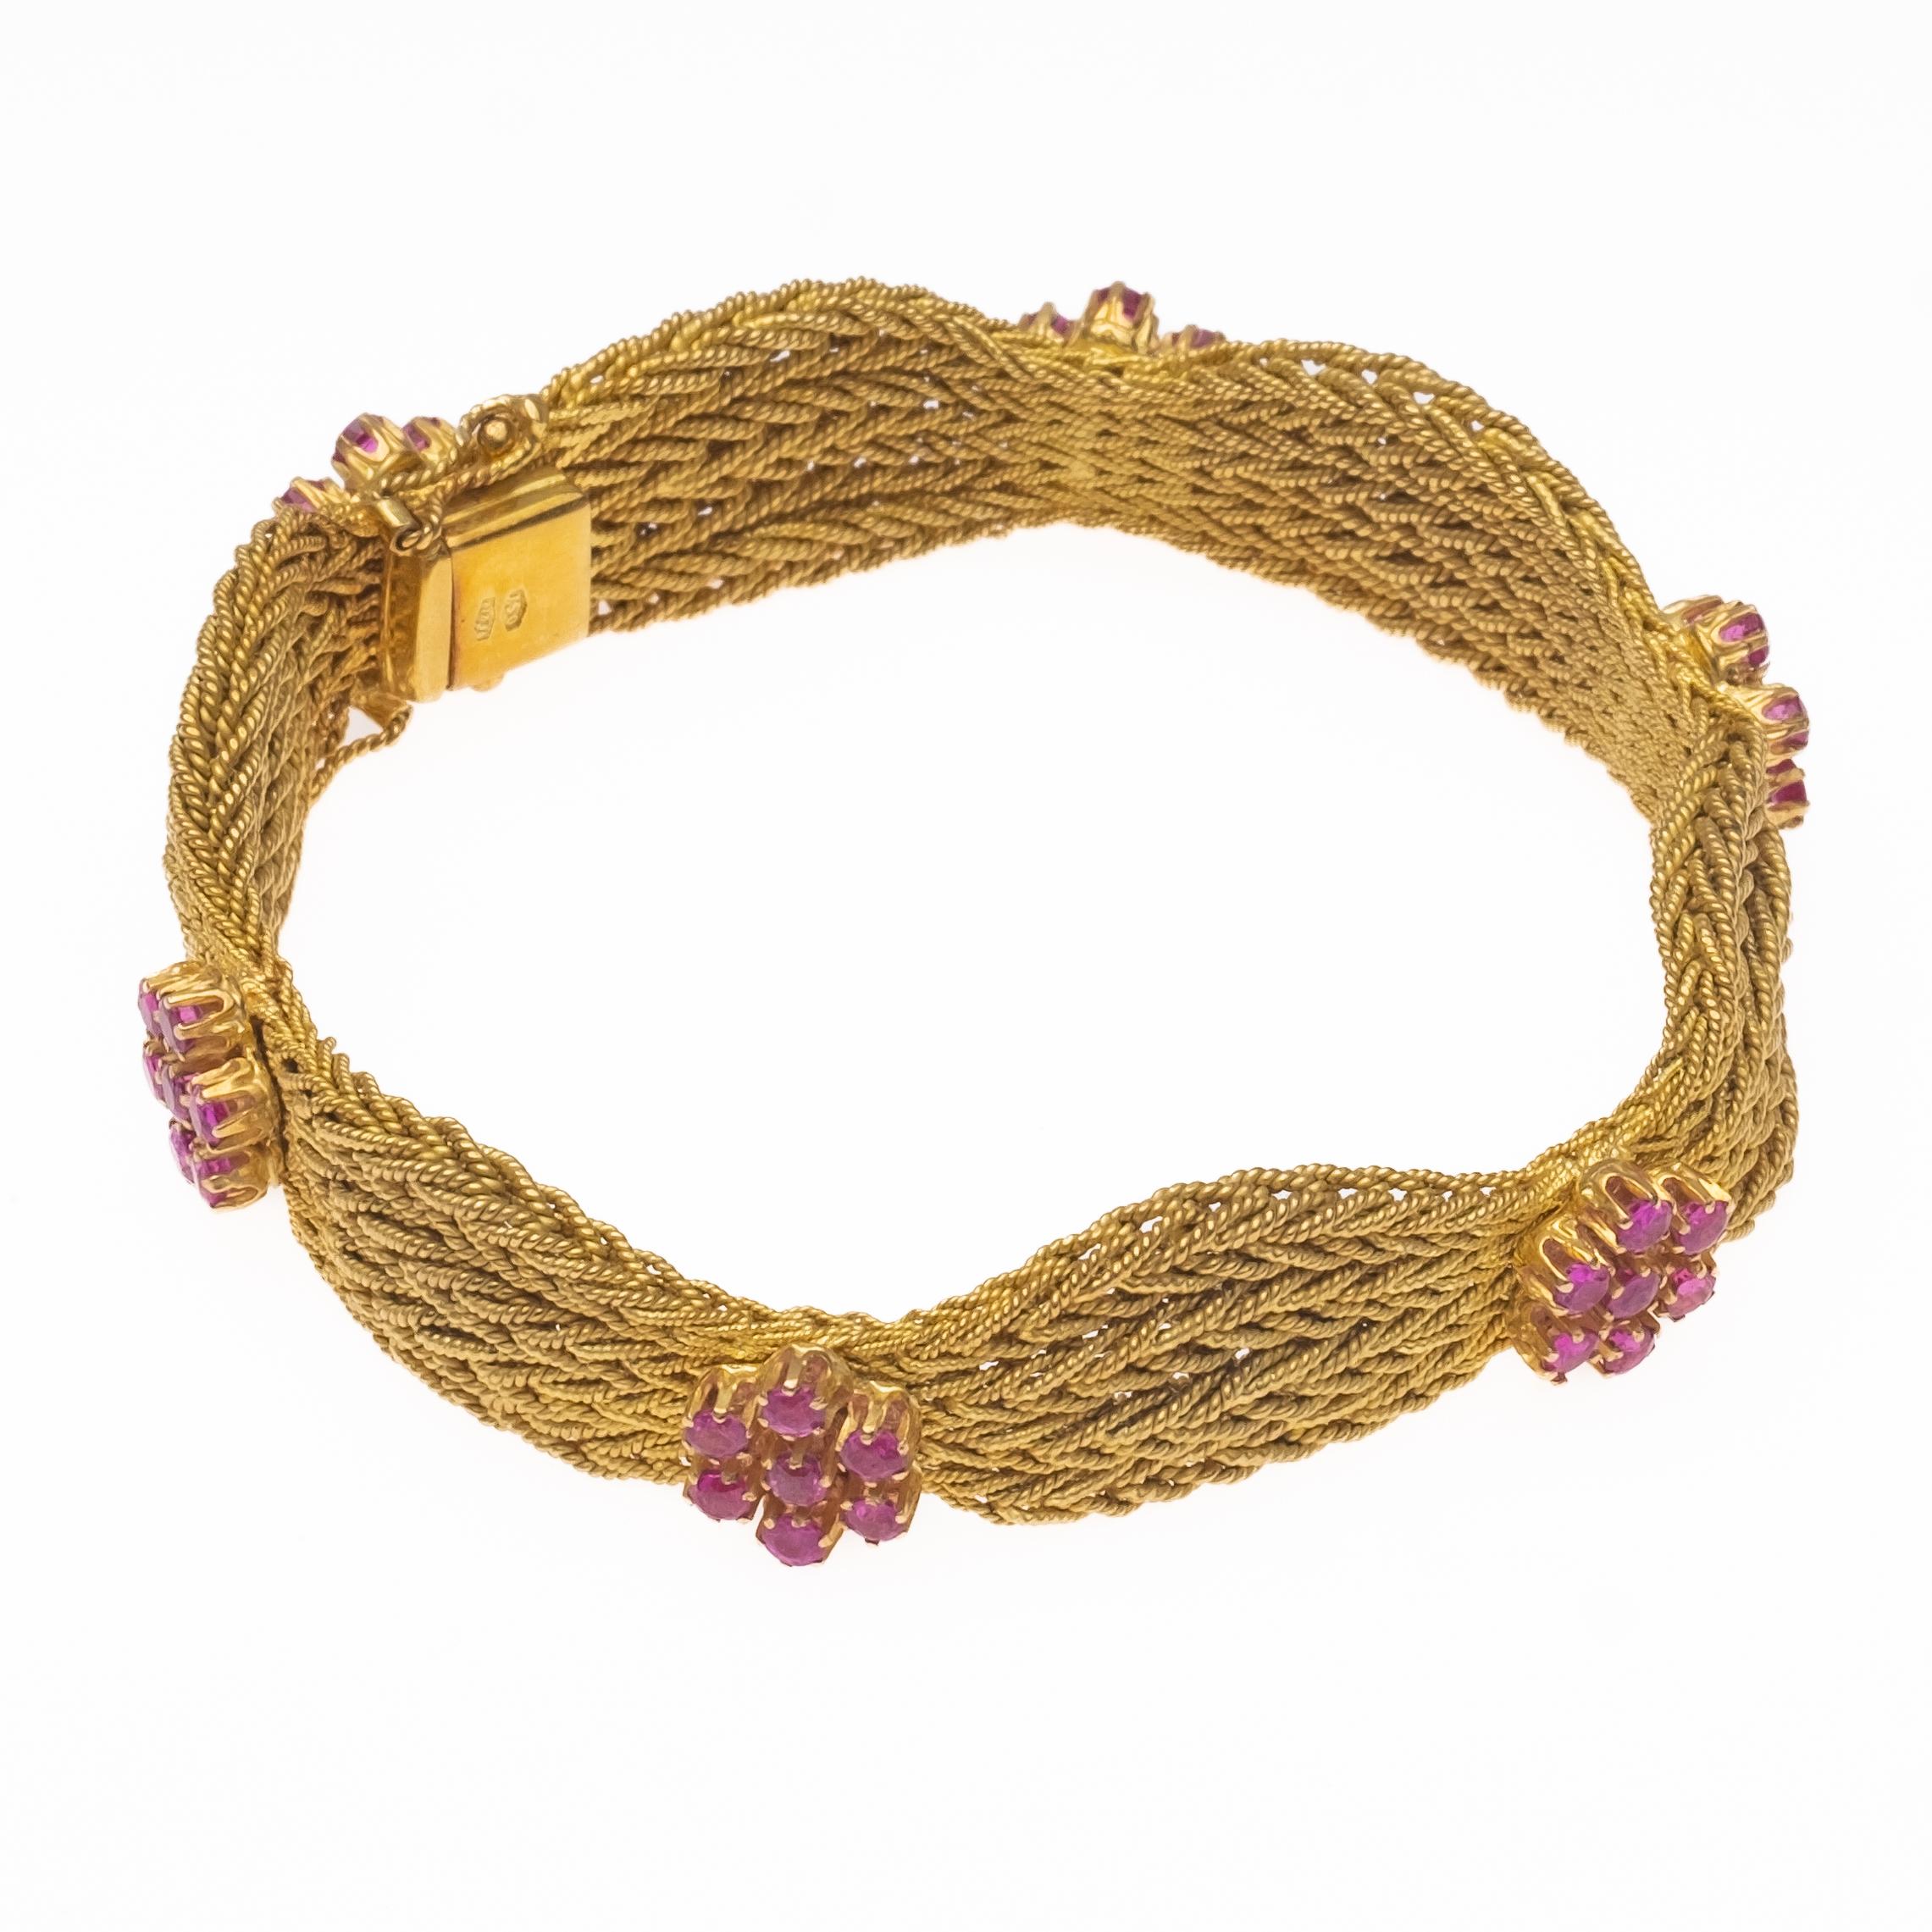 FINE ESTATE 18K GOLD AND Ruby Bracelet. One lady's 18k yellow gold, 7 inch long, fashion bracelet designed with tapering 